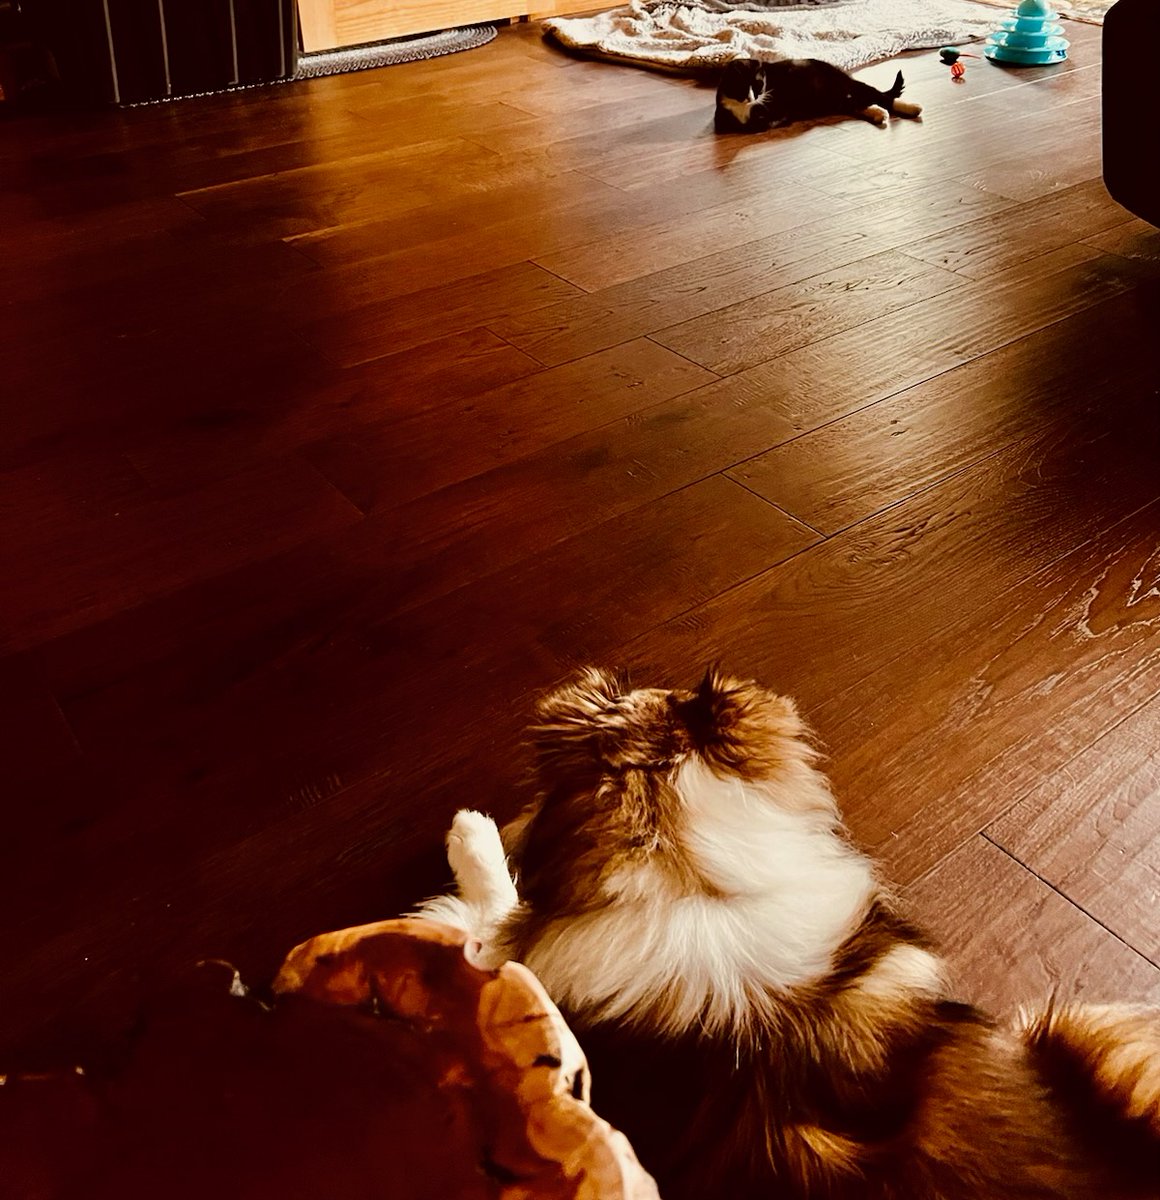 Here's Lulu & her new #sister #doggie Sadie! Not bad for a #cat who's never been around #dogs & just recently arrived in her new home! But we always knew Lulu was extra brave! 💖#cats #pets #Wednesday #GoodVibesOnly #positivevibes #goodnews #virginia #va #animals #friends